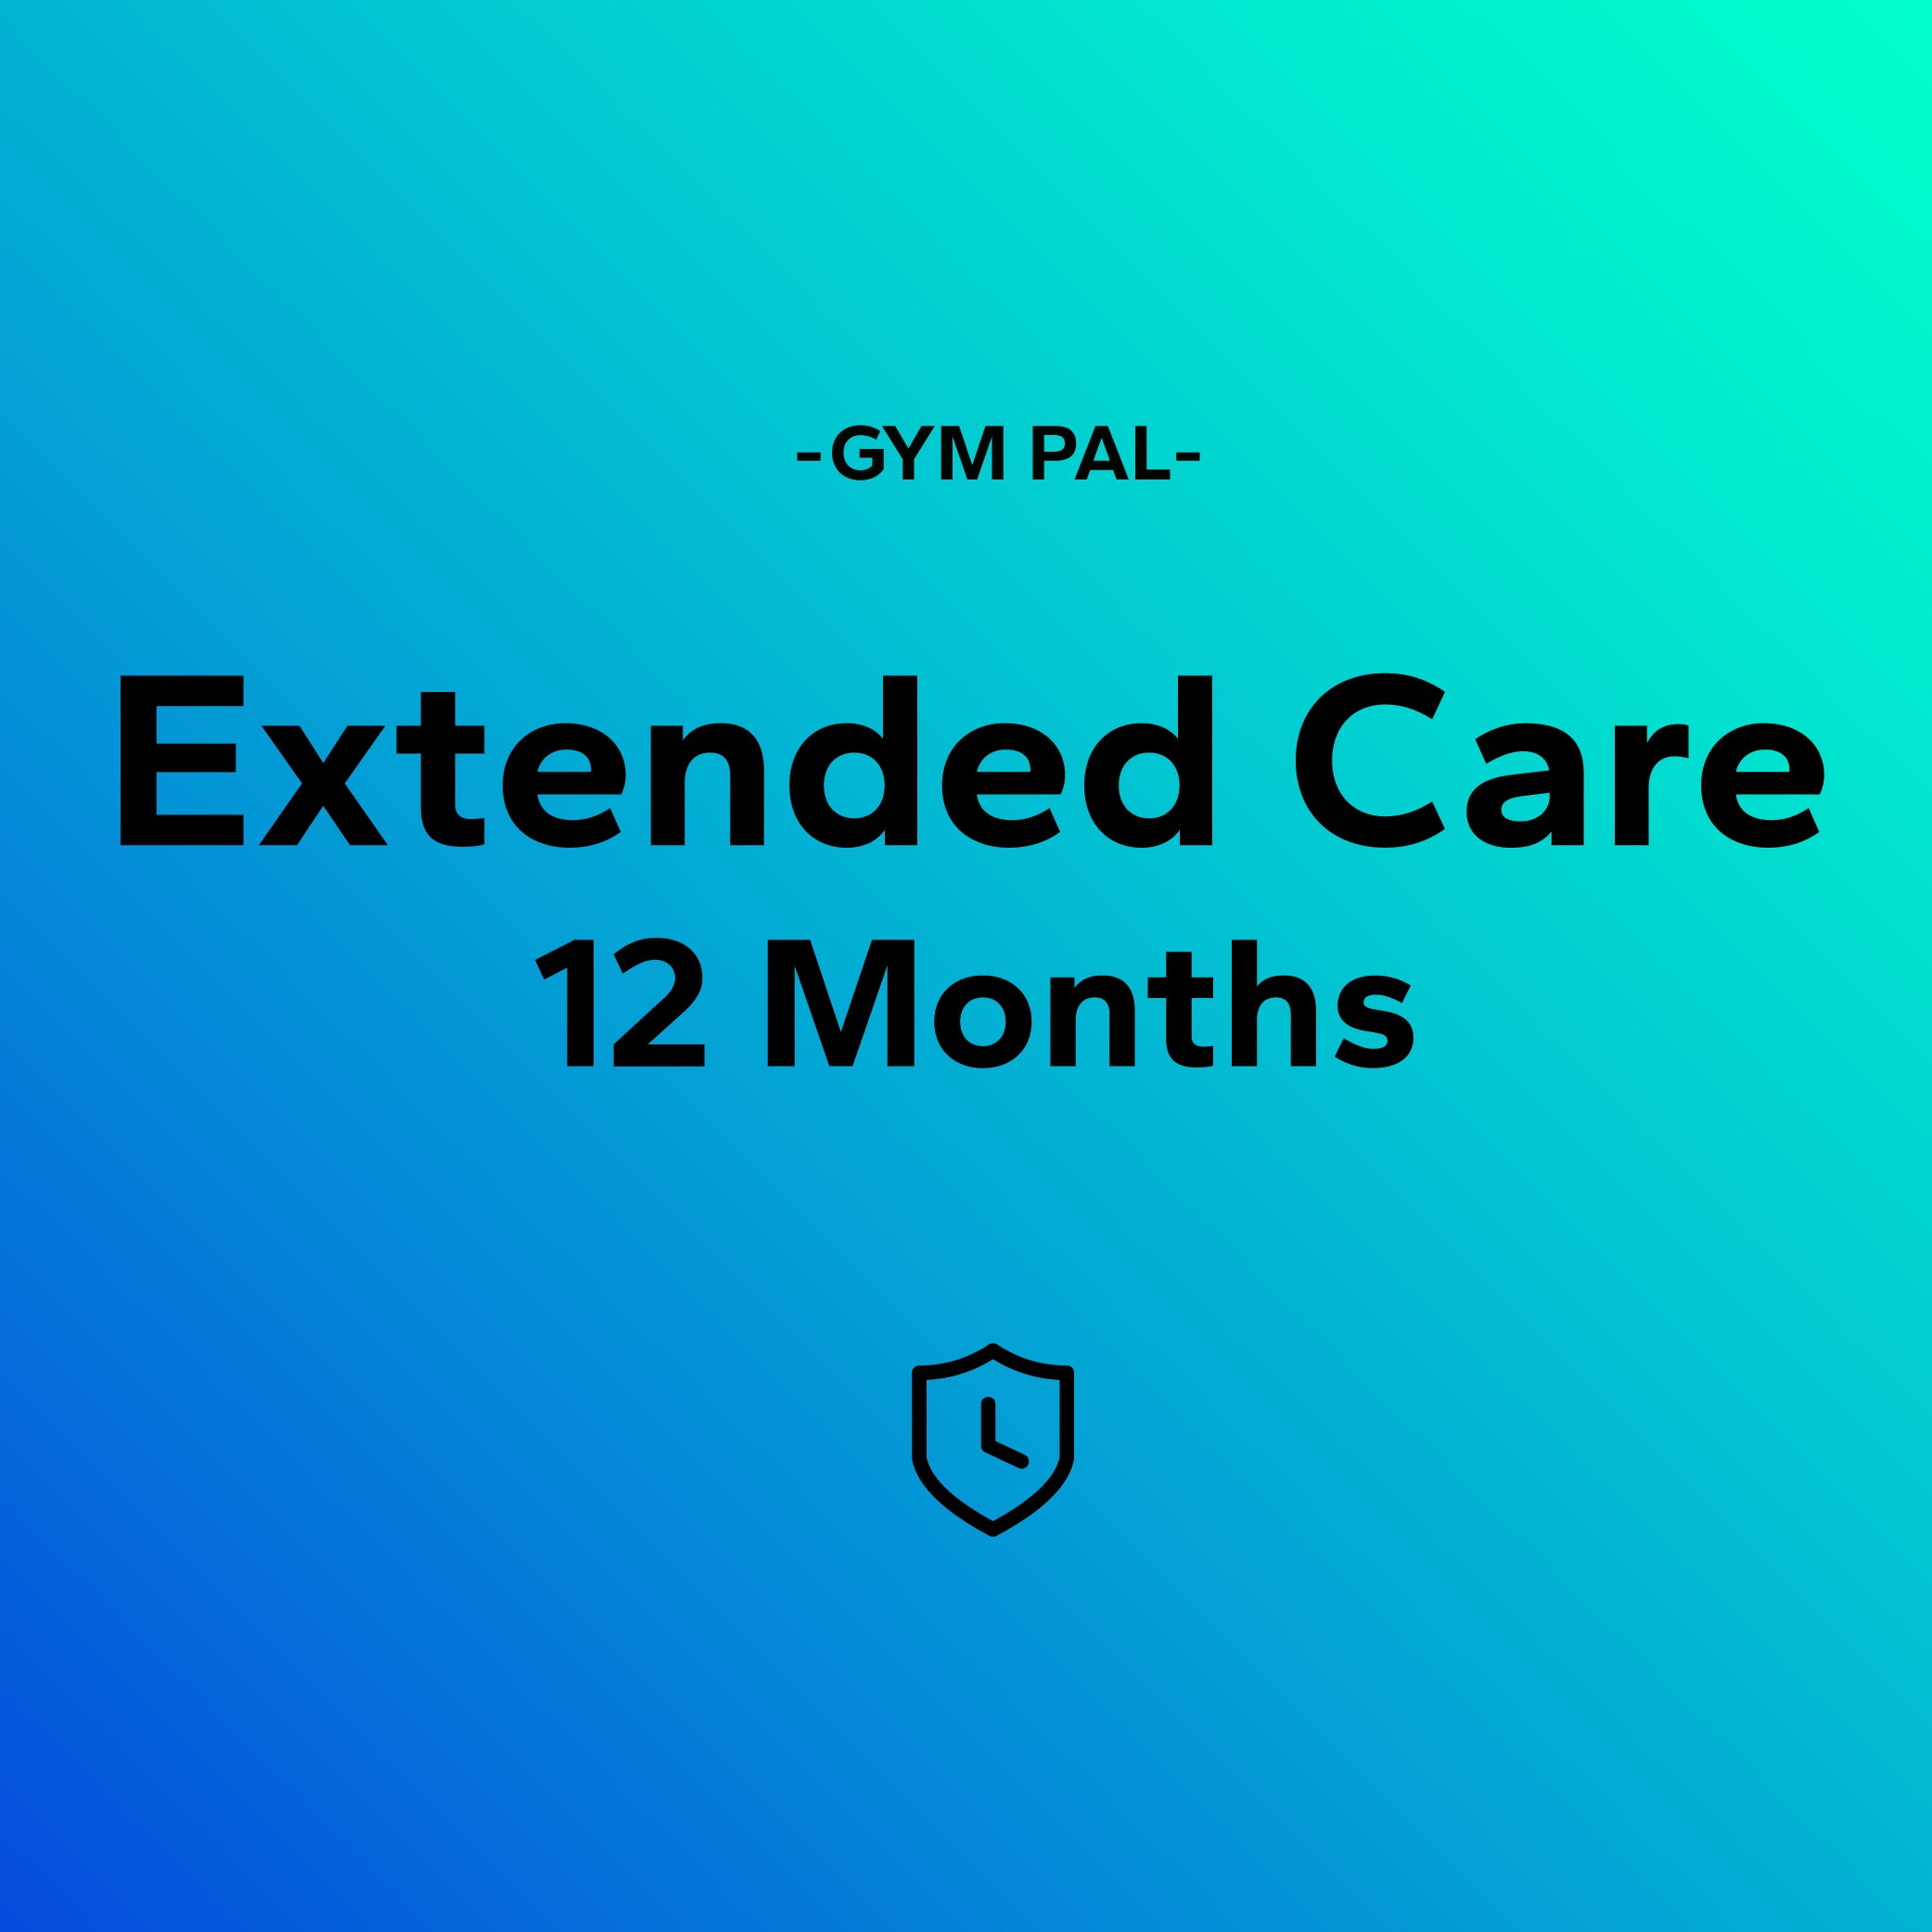 gym pal extended care